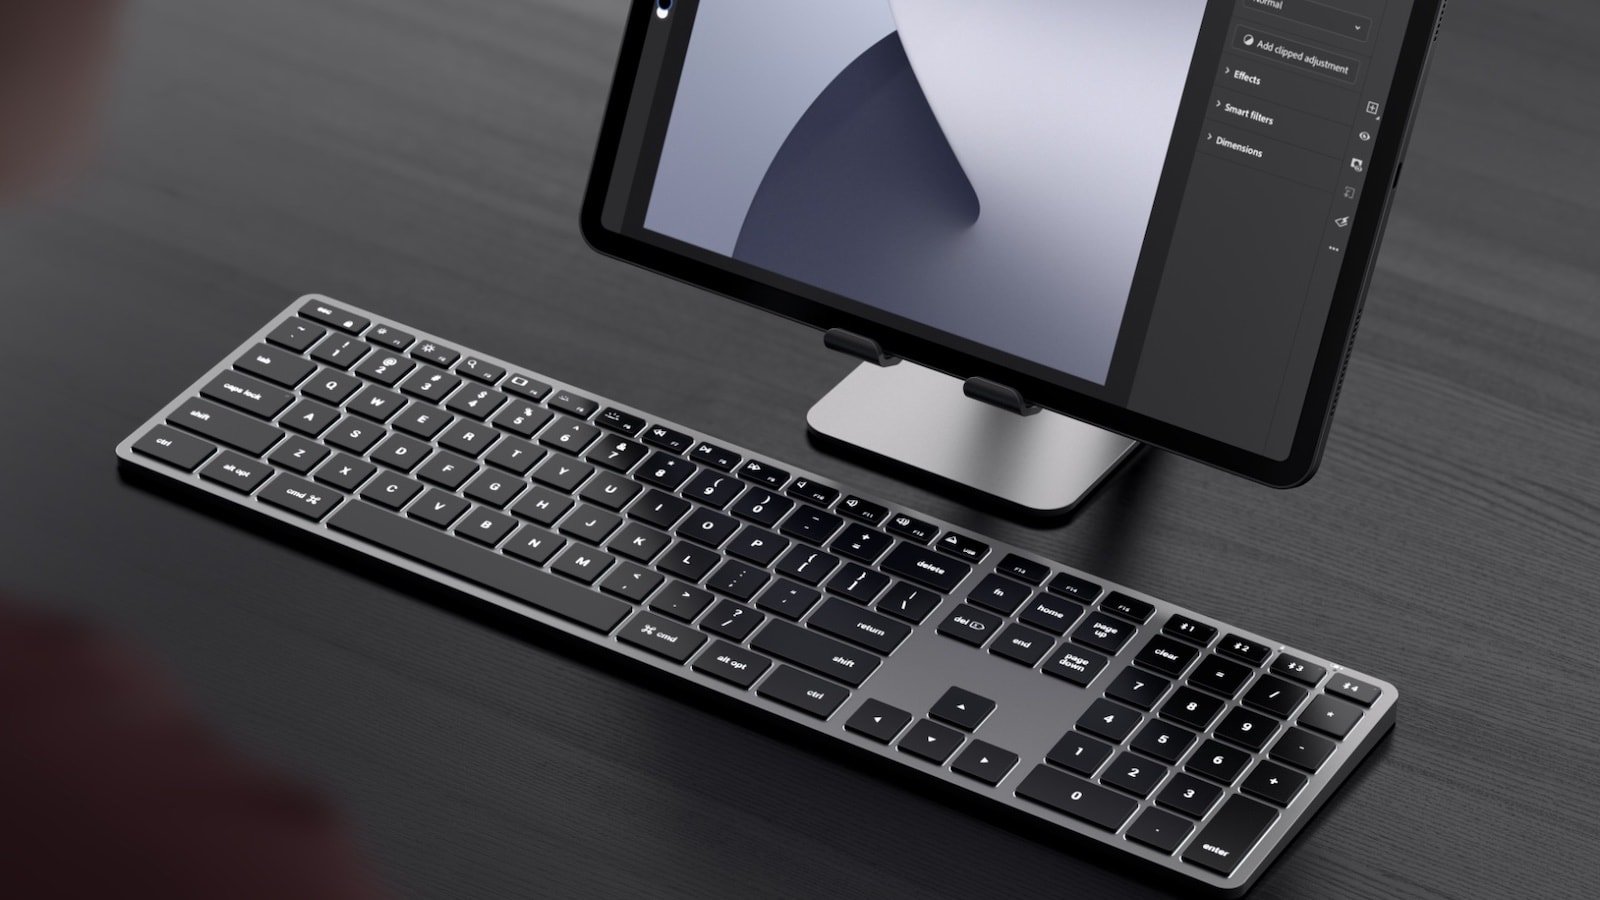 Satechi Slim X3 Bluetooth Backlit Keyboard has a rechargeable battery